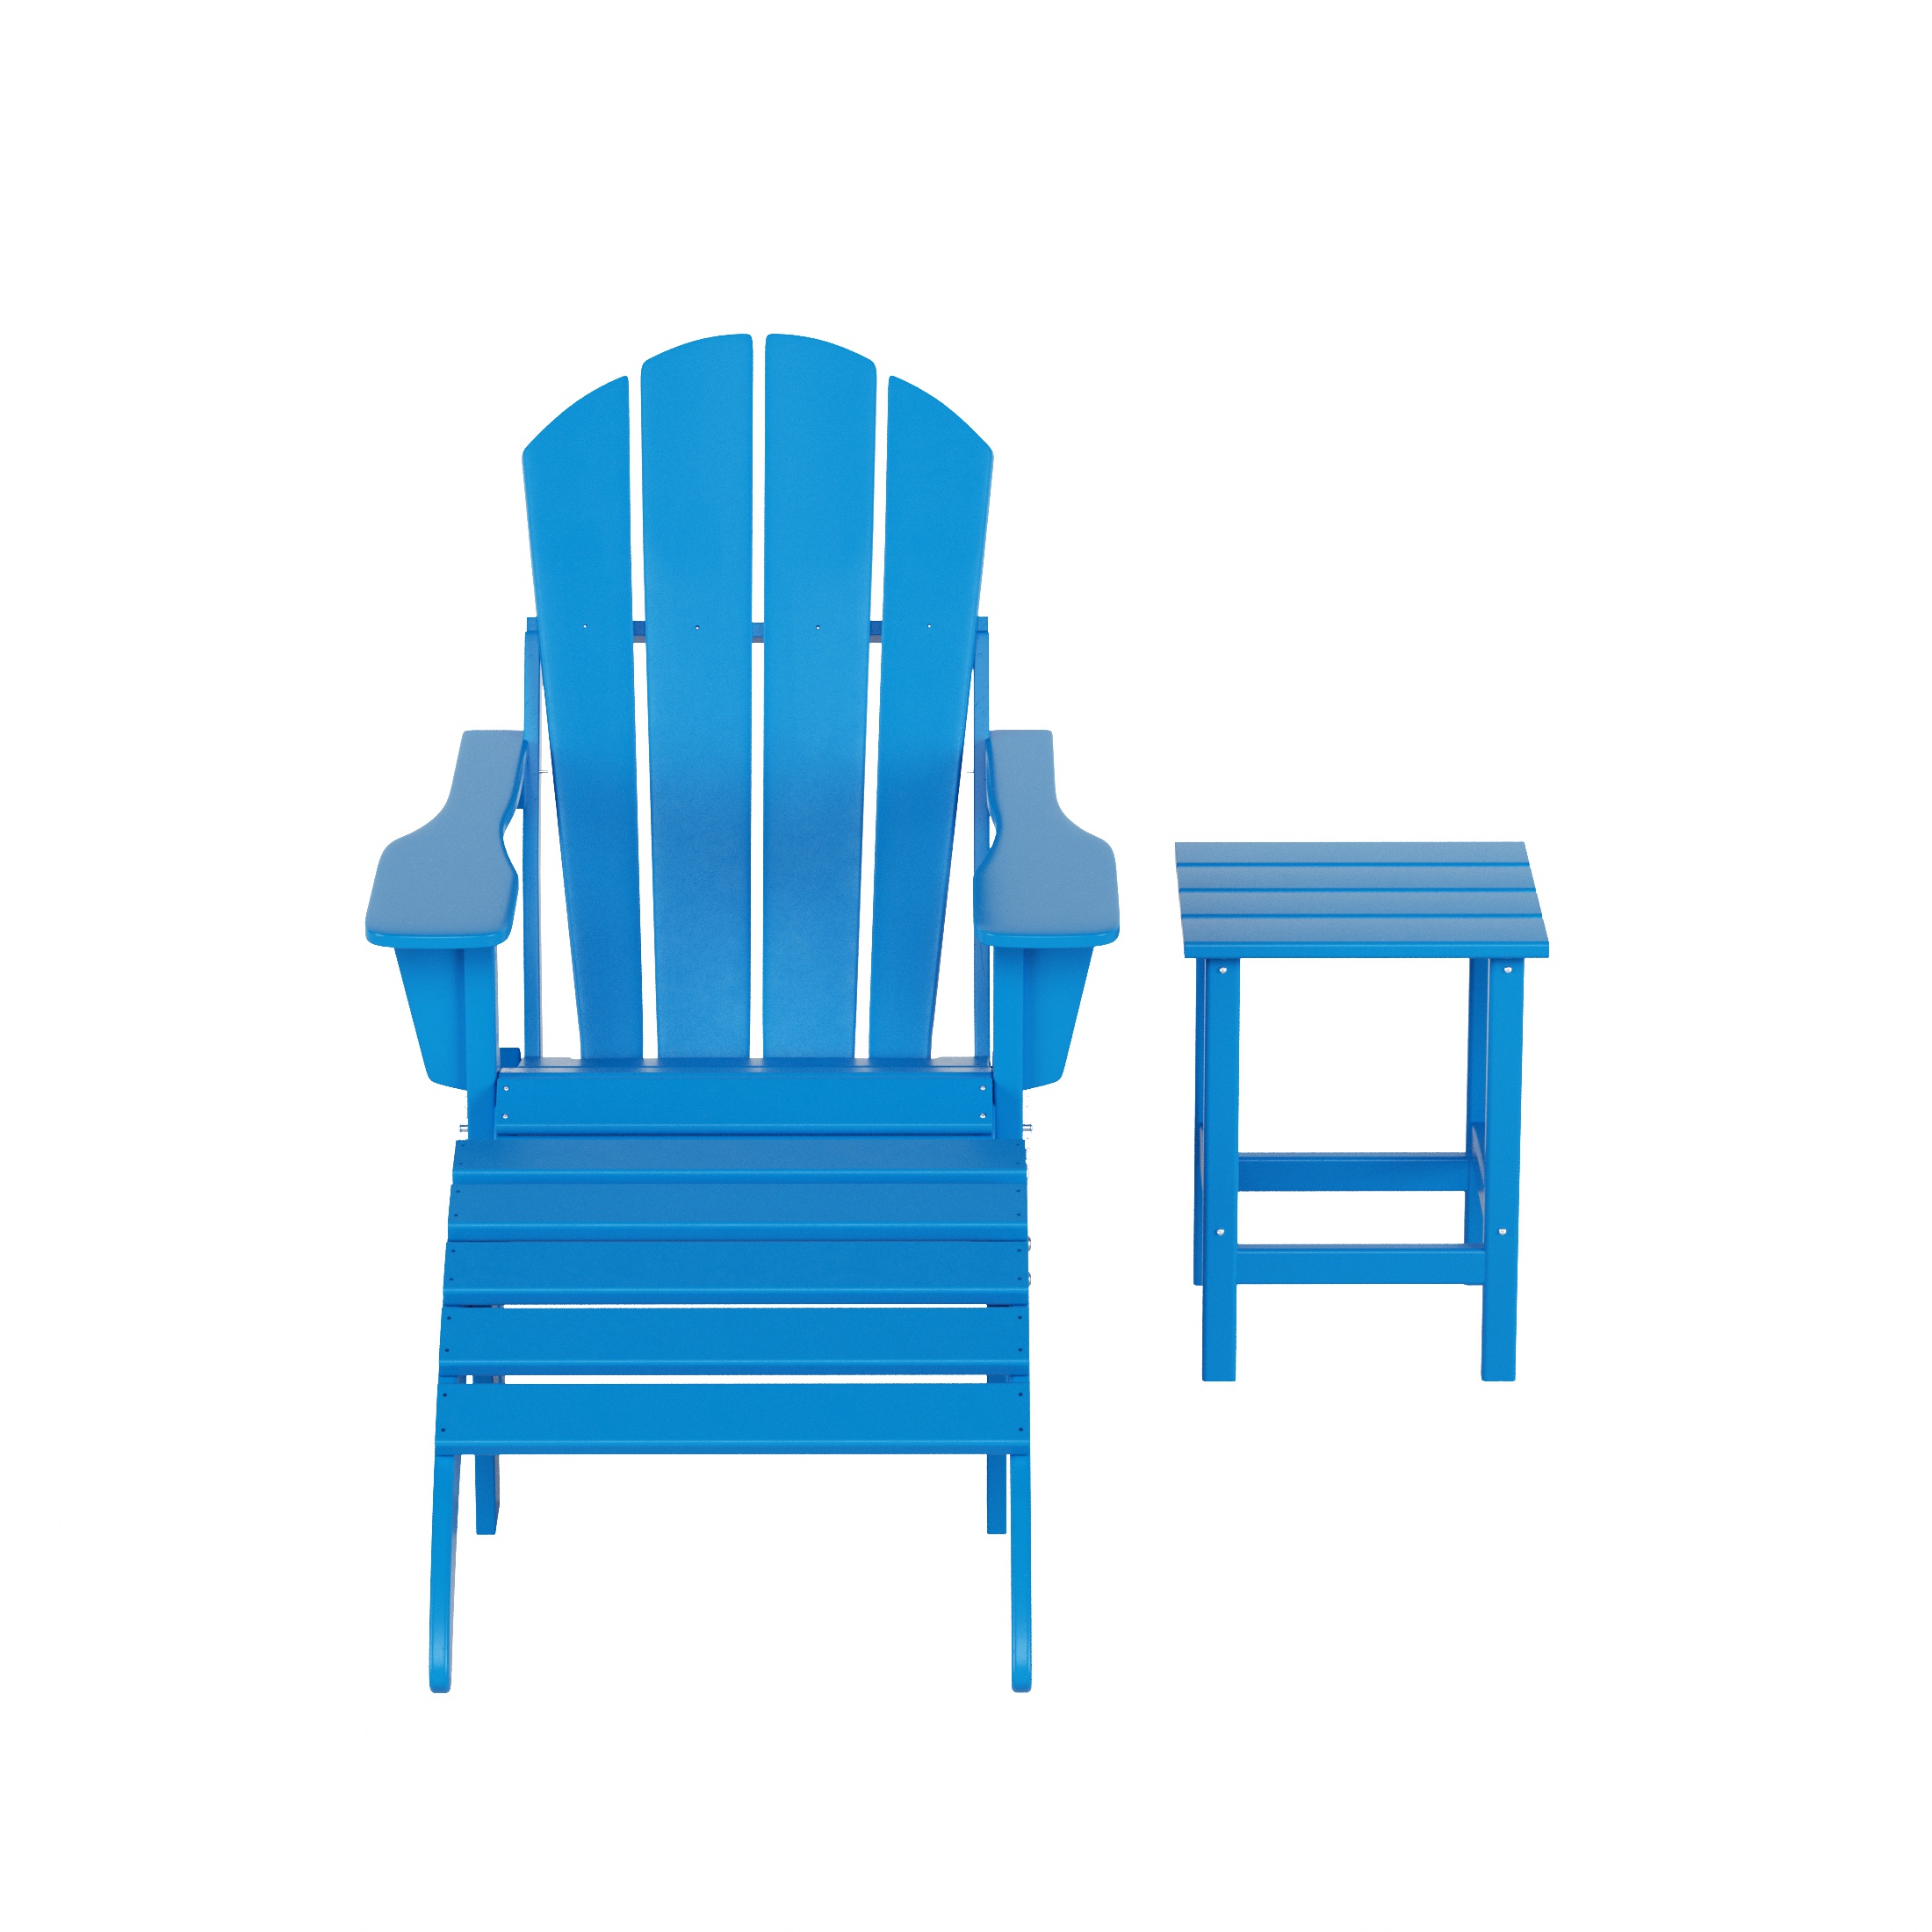 WestinTrends Malibu Outdoor Lounge Chairs, 3-Pieces Adirondack Chair Set with Ottoman and Side Table, All Weather Poly Lumber Patio Lawn Folding Chair for Outside Pool Garden Backyard, Pacific Blue - image 3 of 7